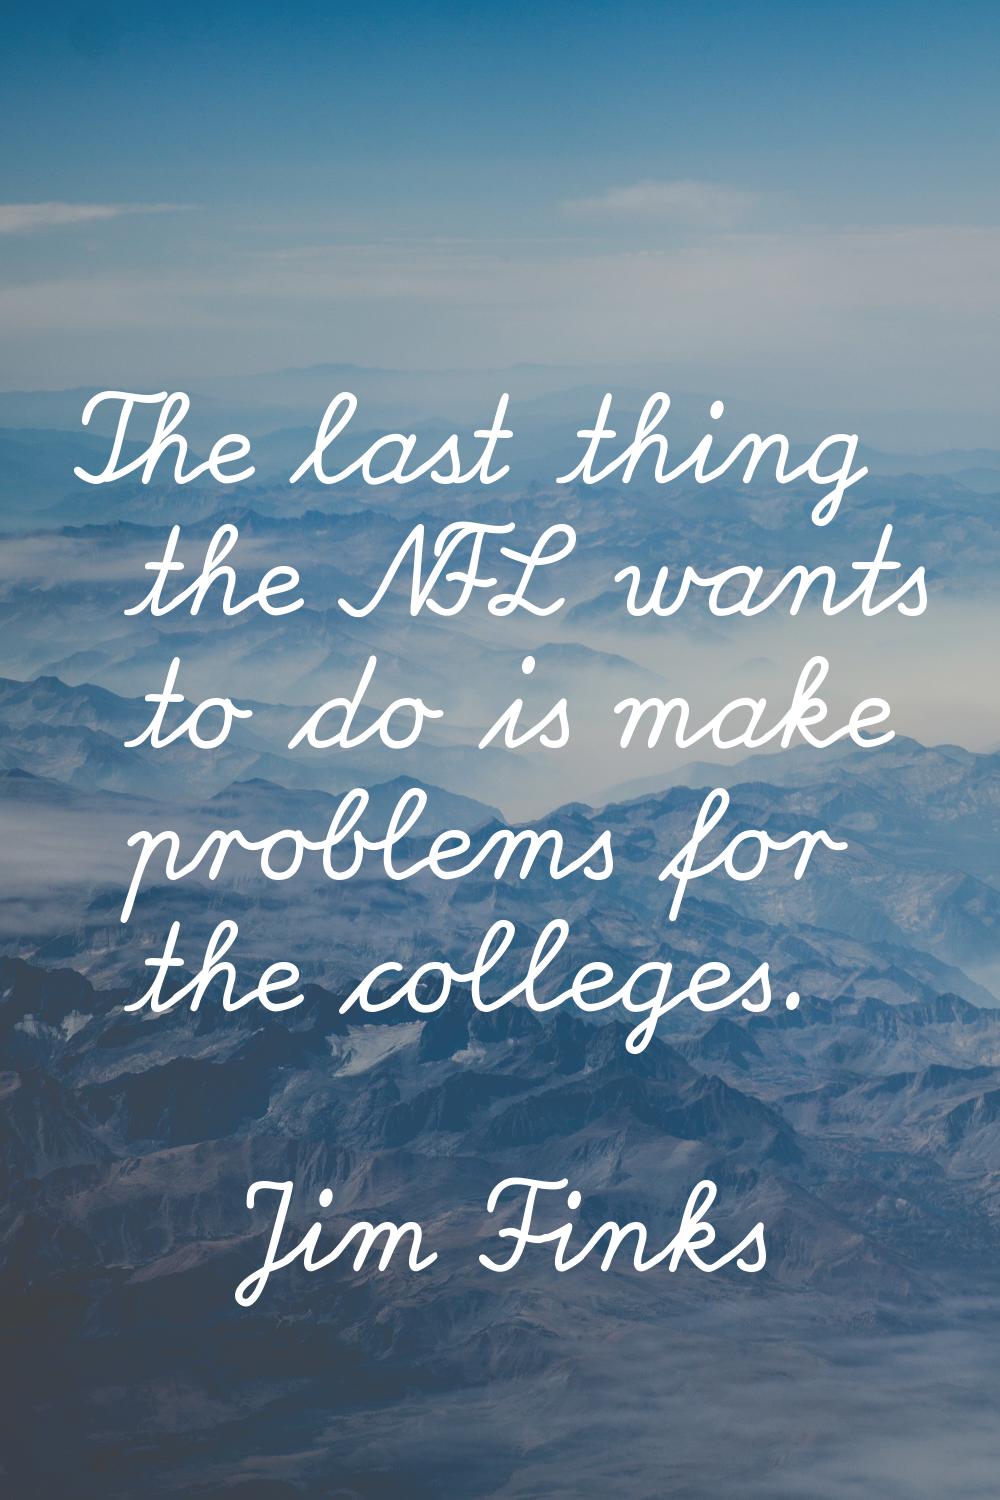 The last thing the NFL wants to do is make problems for the colleges.